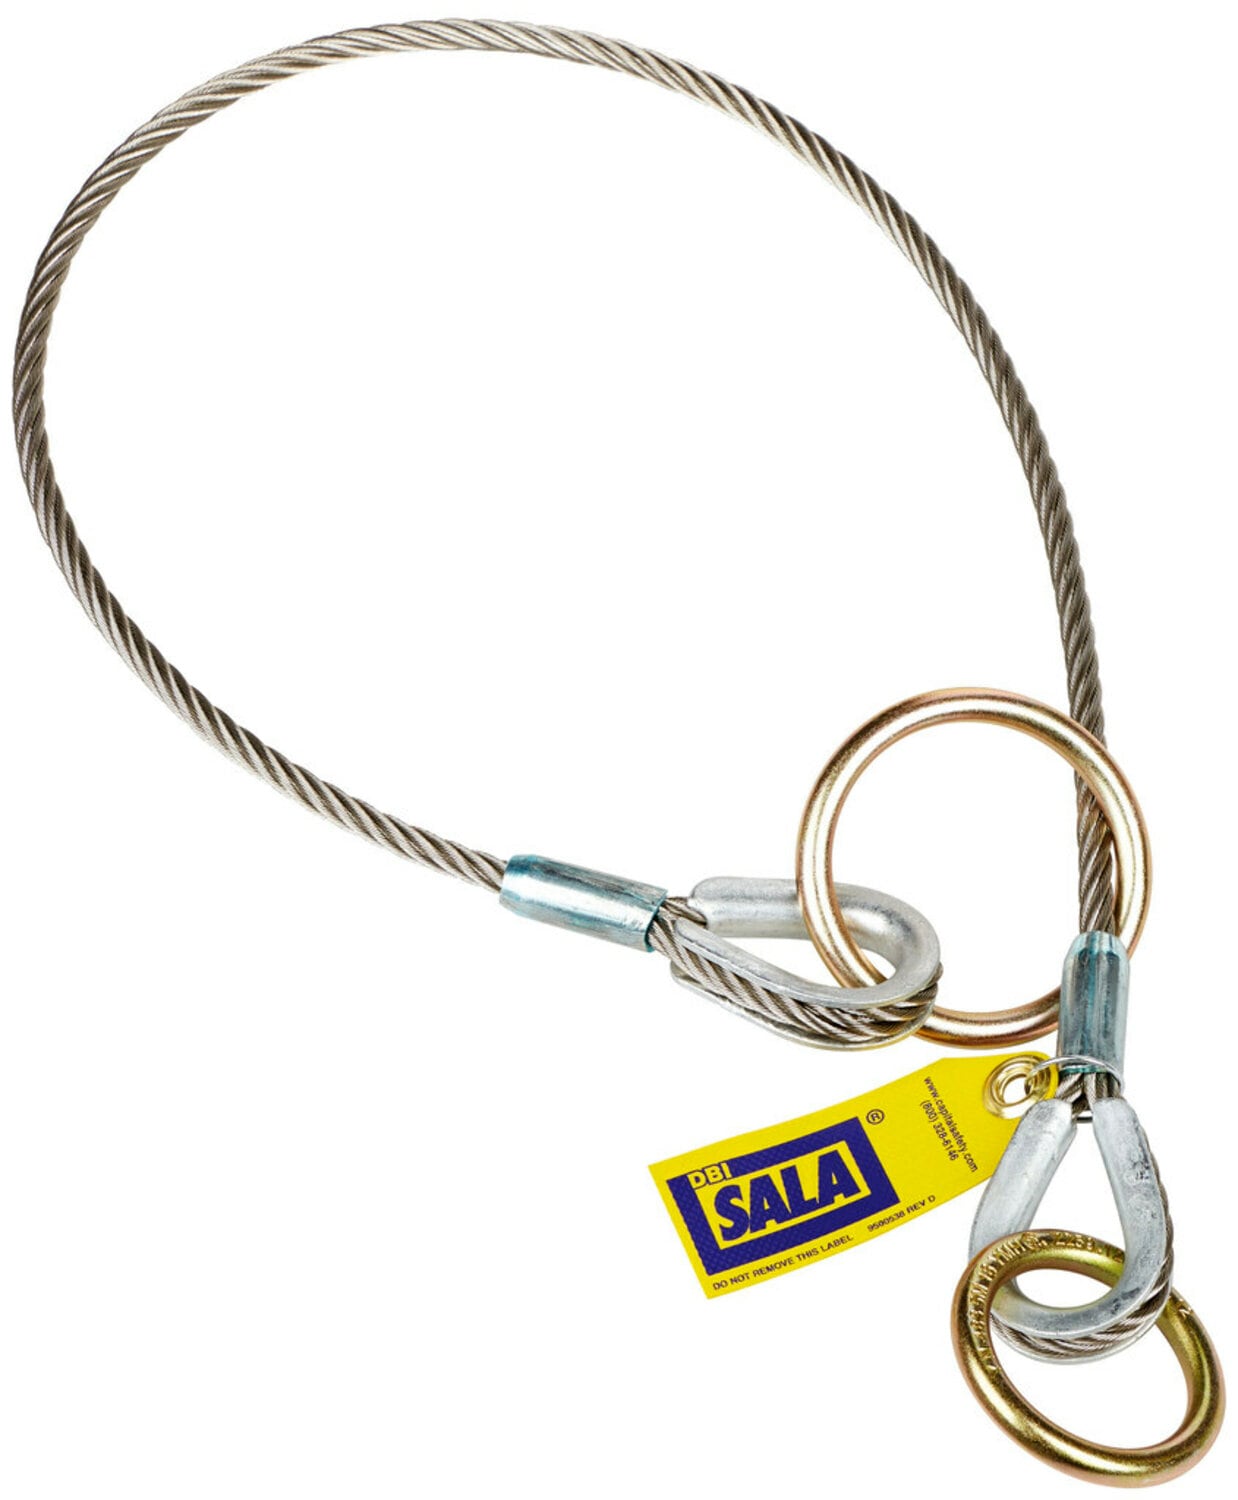 7012819627 - 3M DBI-SALA Pass-Thru Cable Tie-Off Adapter Anchor 5900566, Stainless Steel, 29 ft